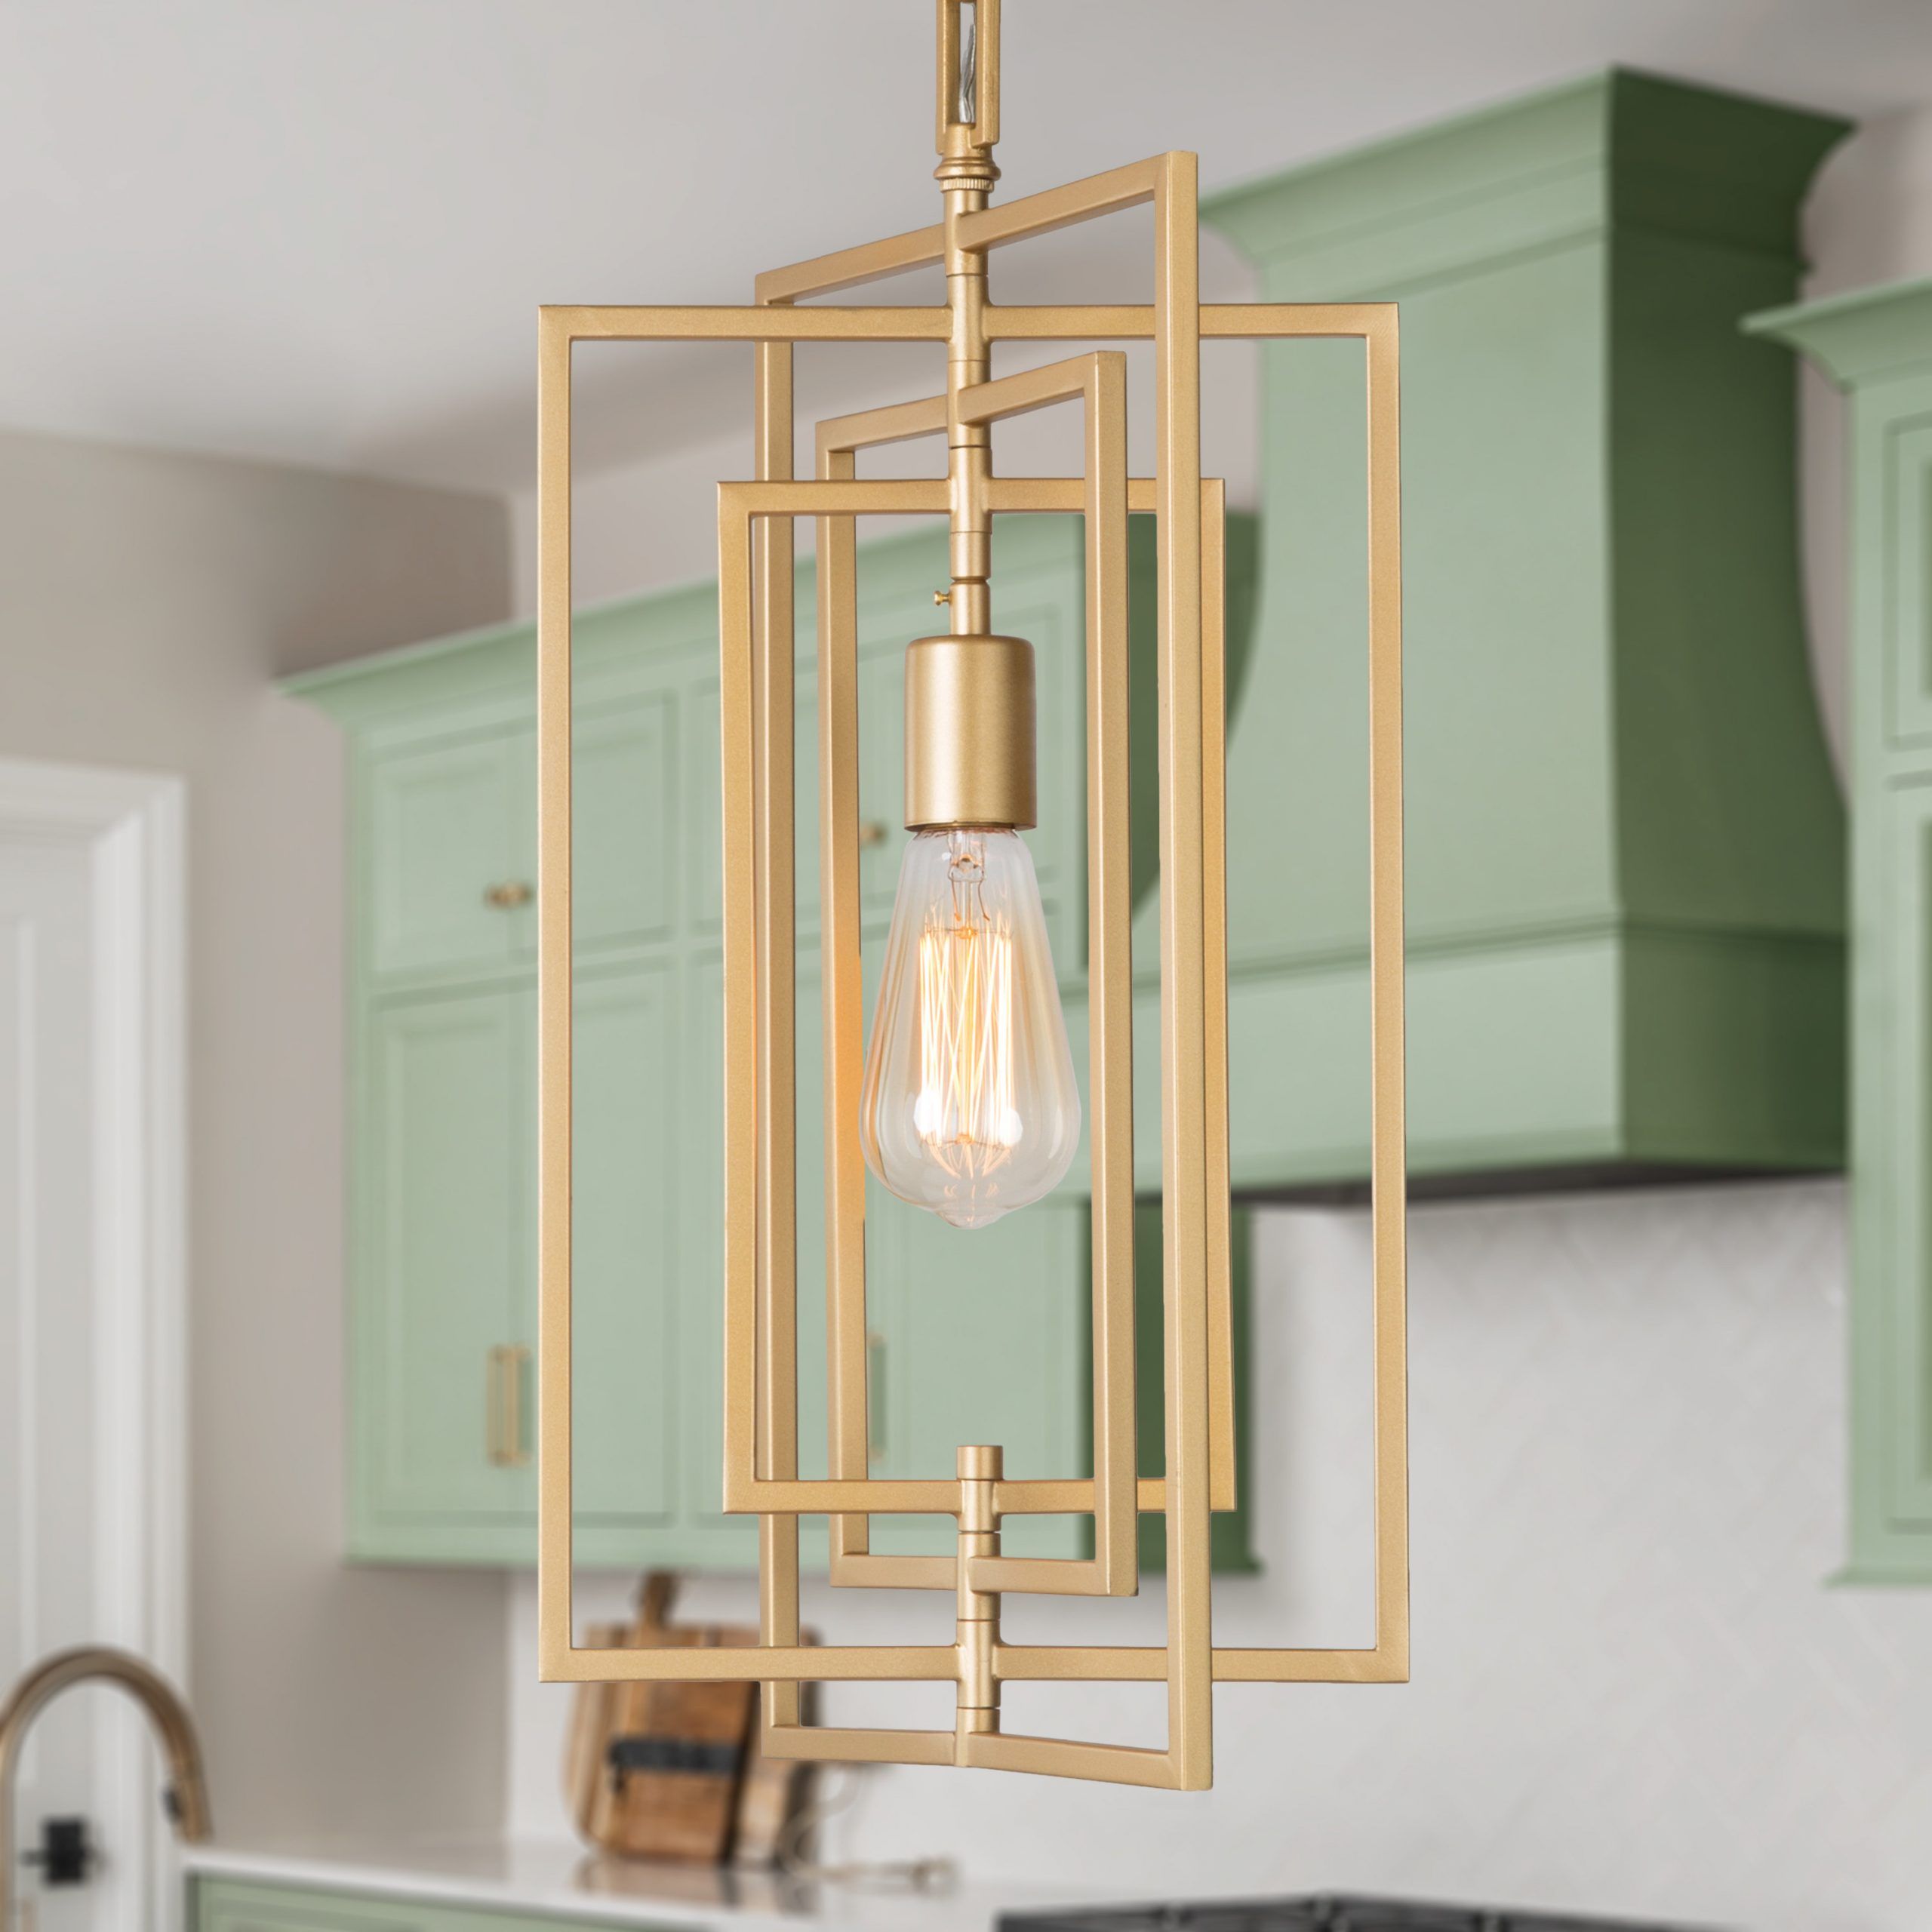 Wayfair With Best And Newest Gild One Light Lantern Chandeliers (View 11 of 15)